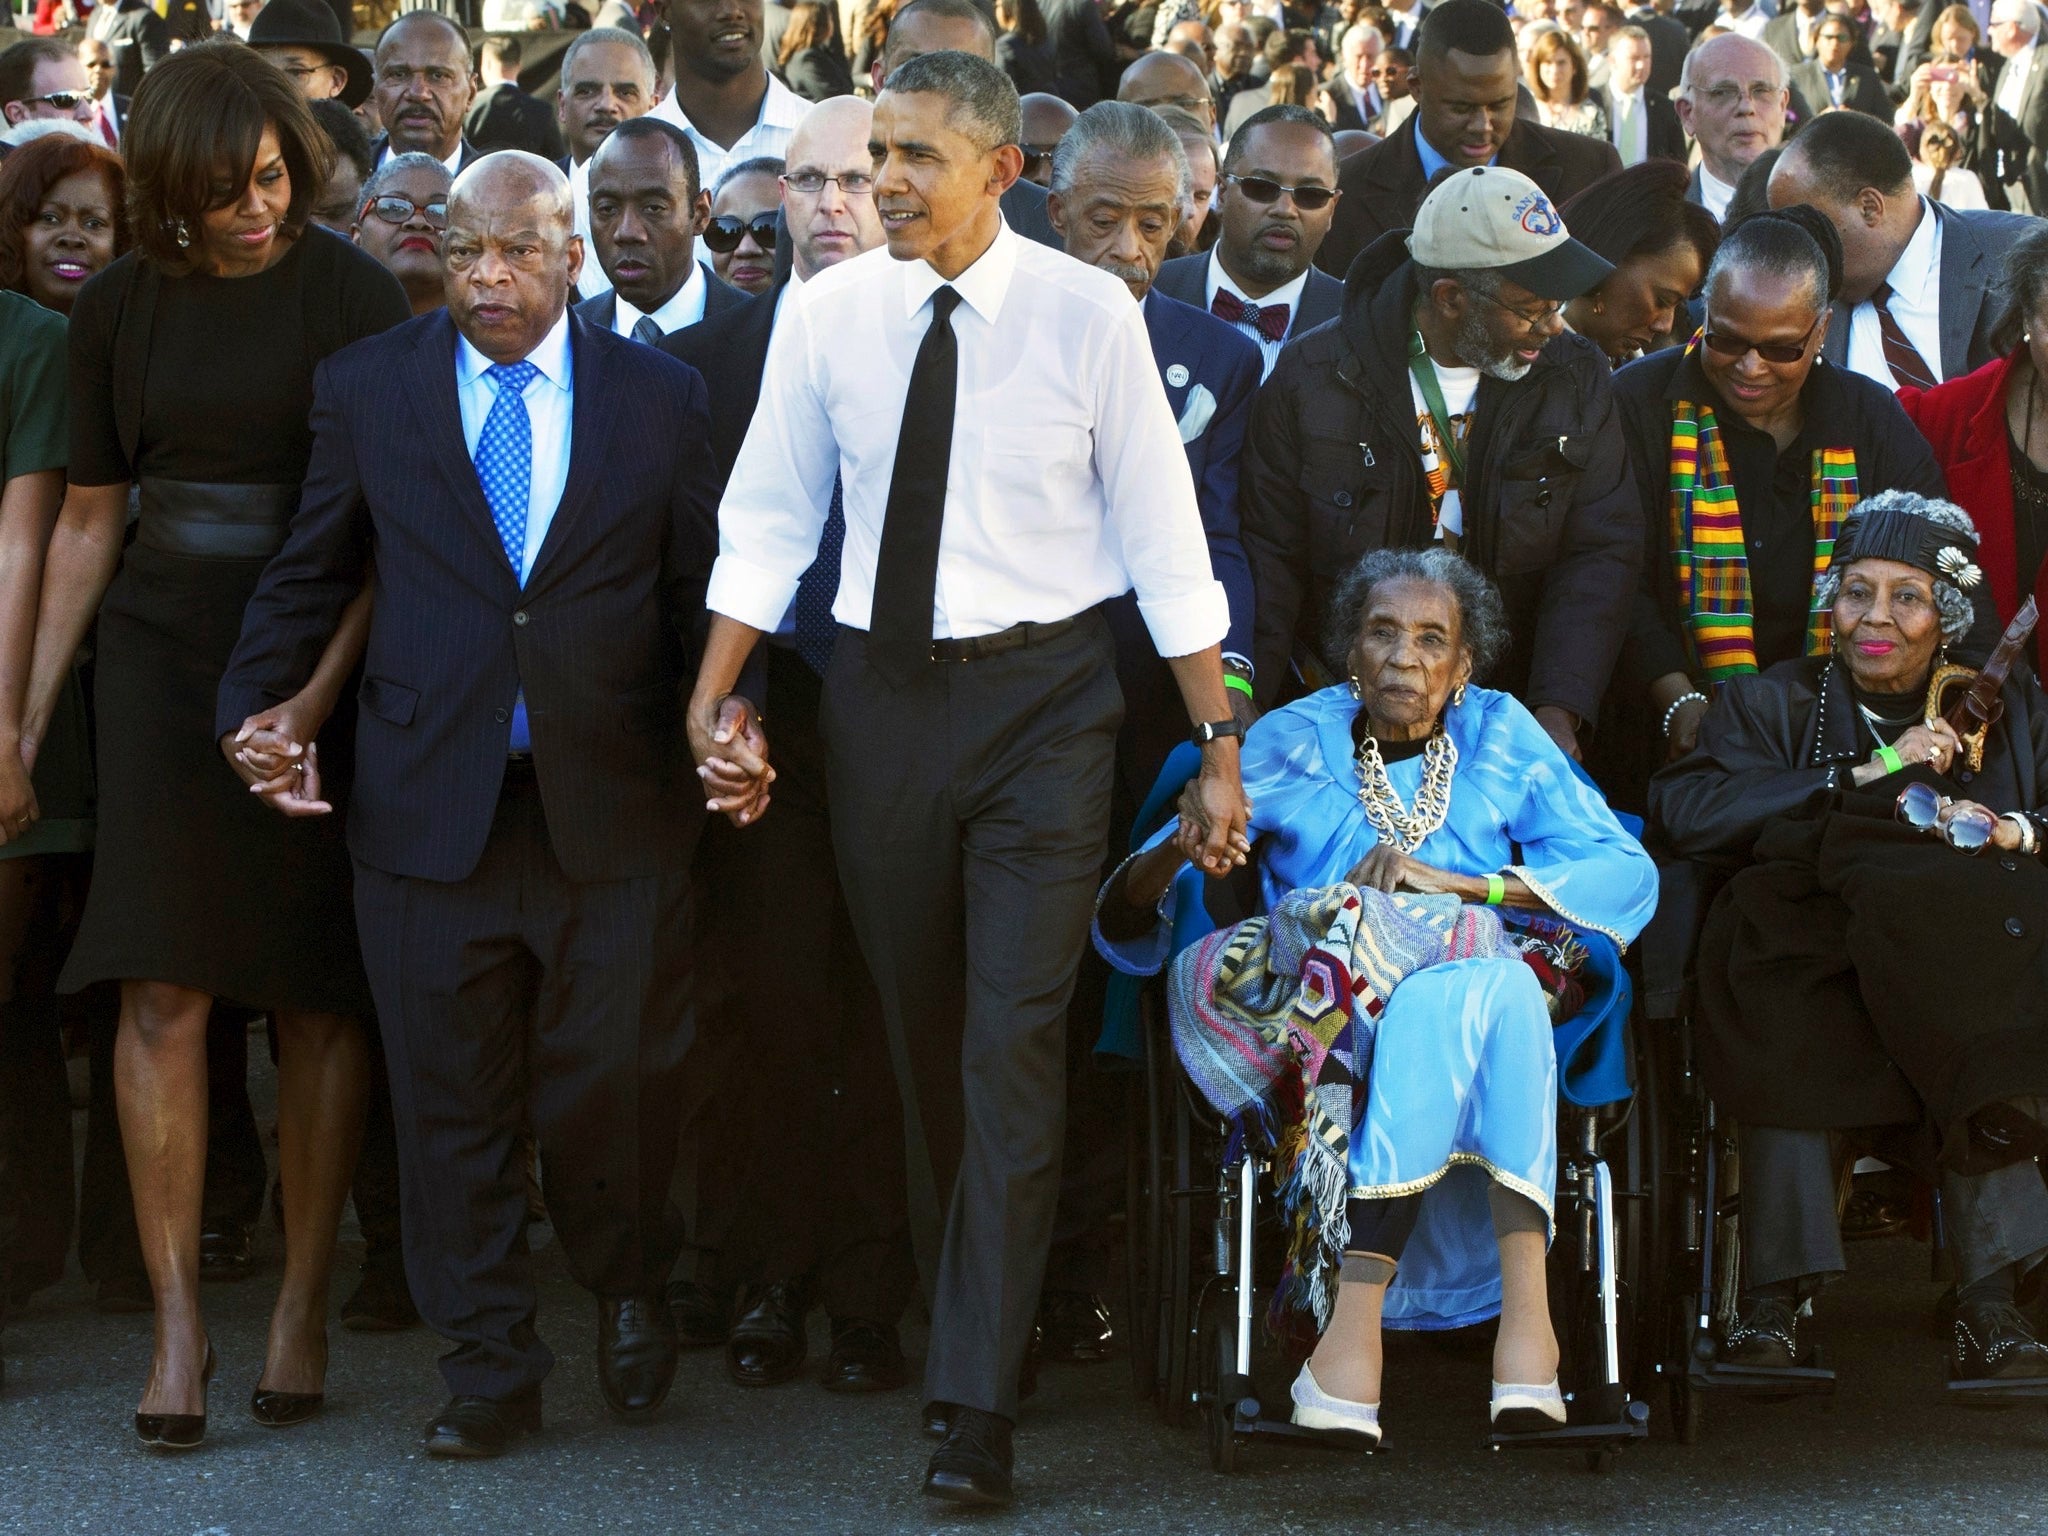 Amelia Boynton Robinson and President Obama on the 50th anniversary of the march